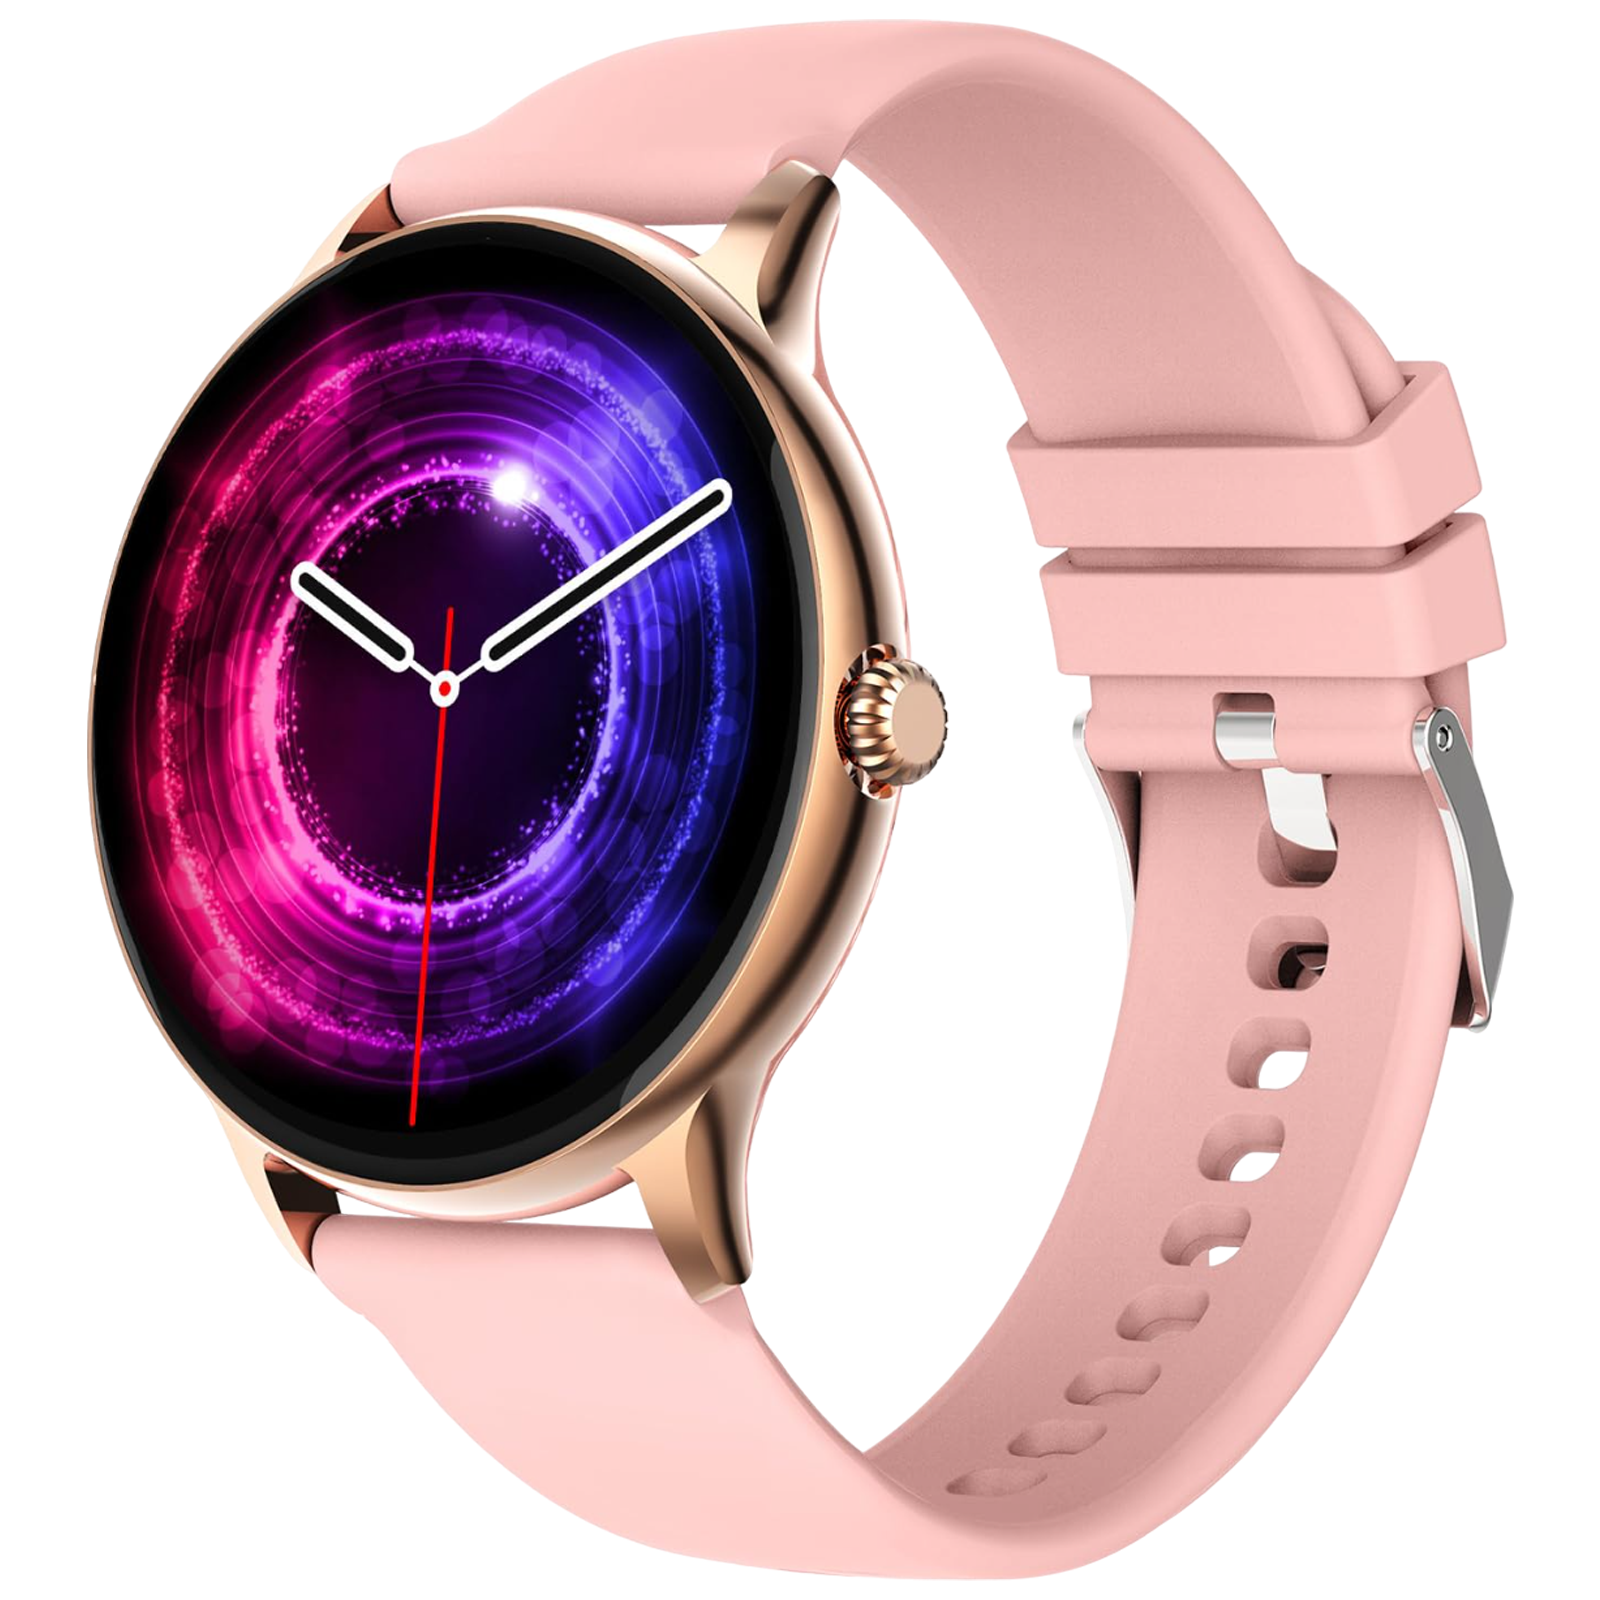 FIRE-BOLTT Phoenix Pro Smartwatch with Bluetooth Calling (35.3mm HD TFT Display, IP67 Water Resistant, Gold Pink Strap)